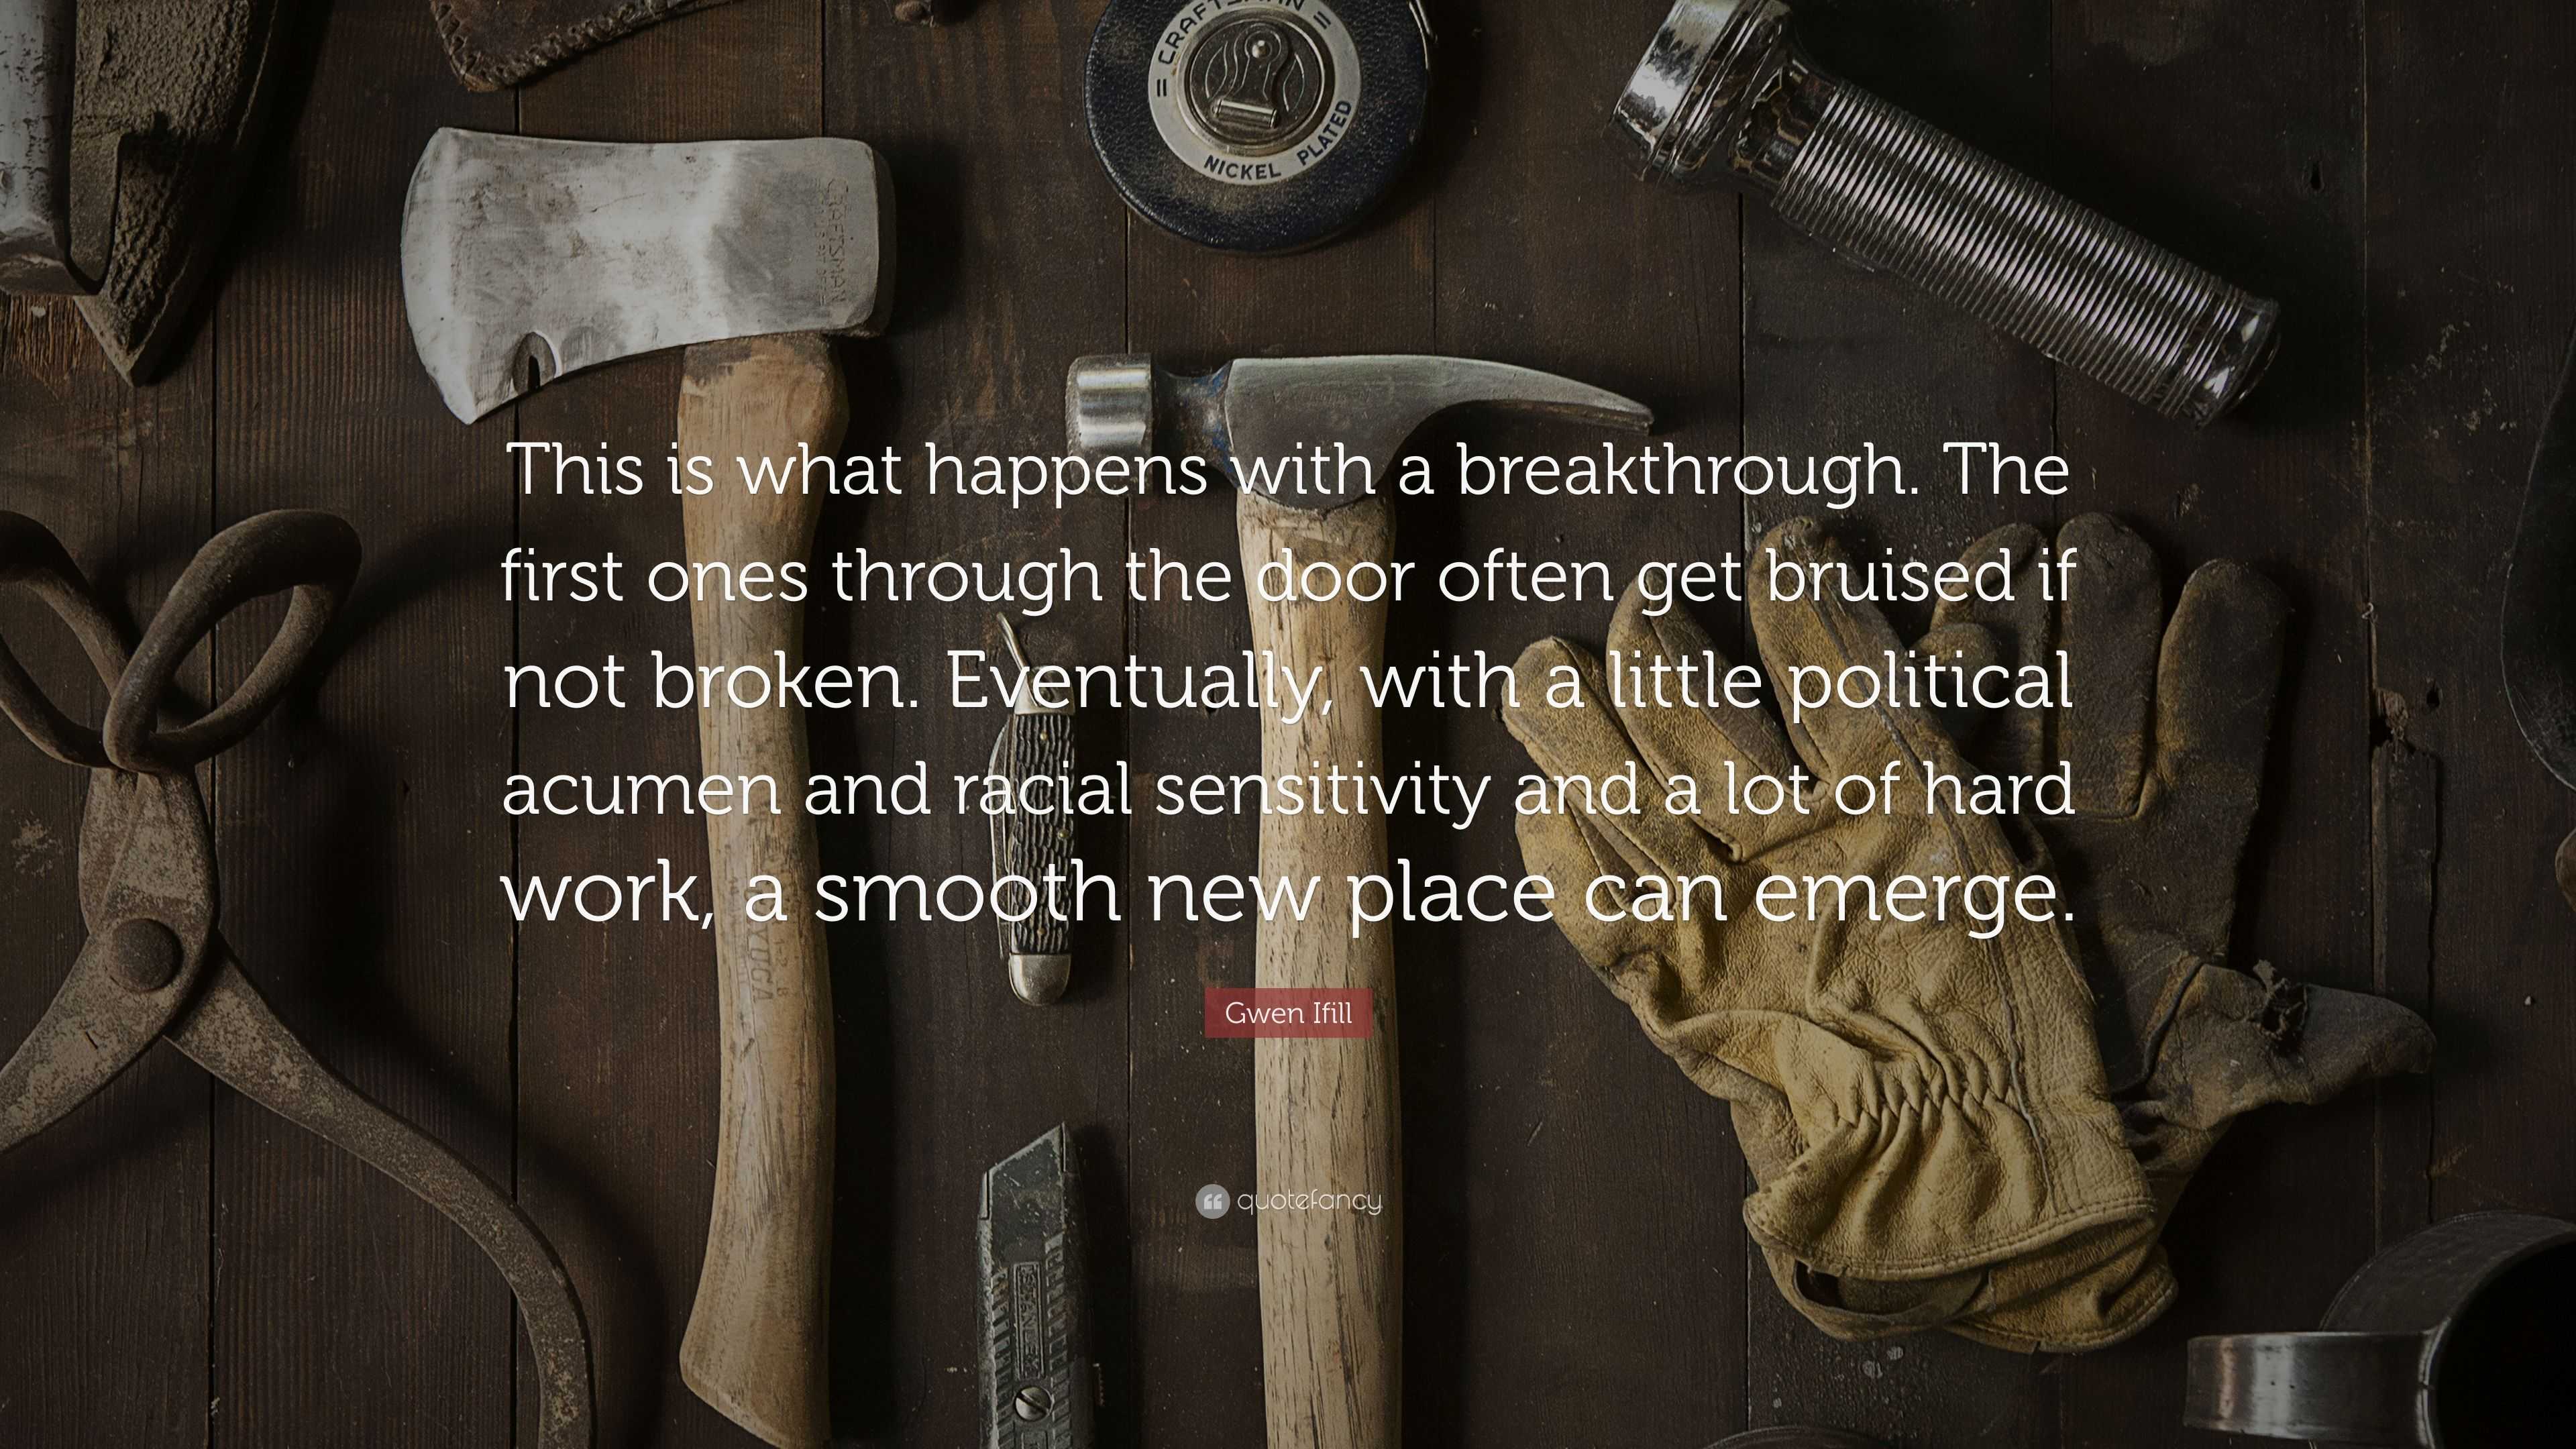 The Breakthrough by Gwen Ifill